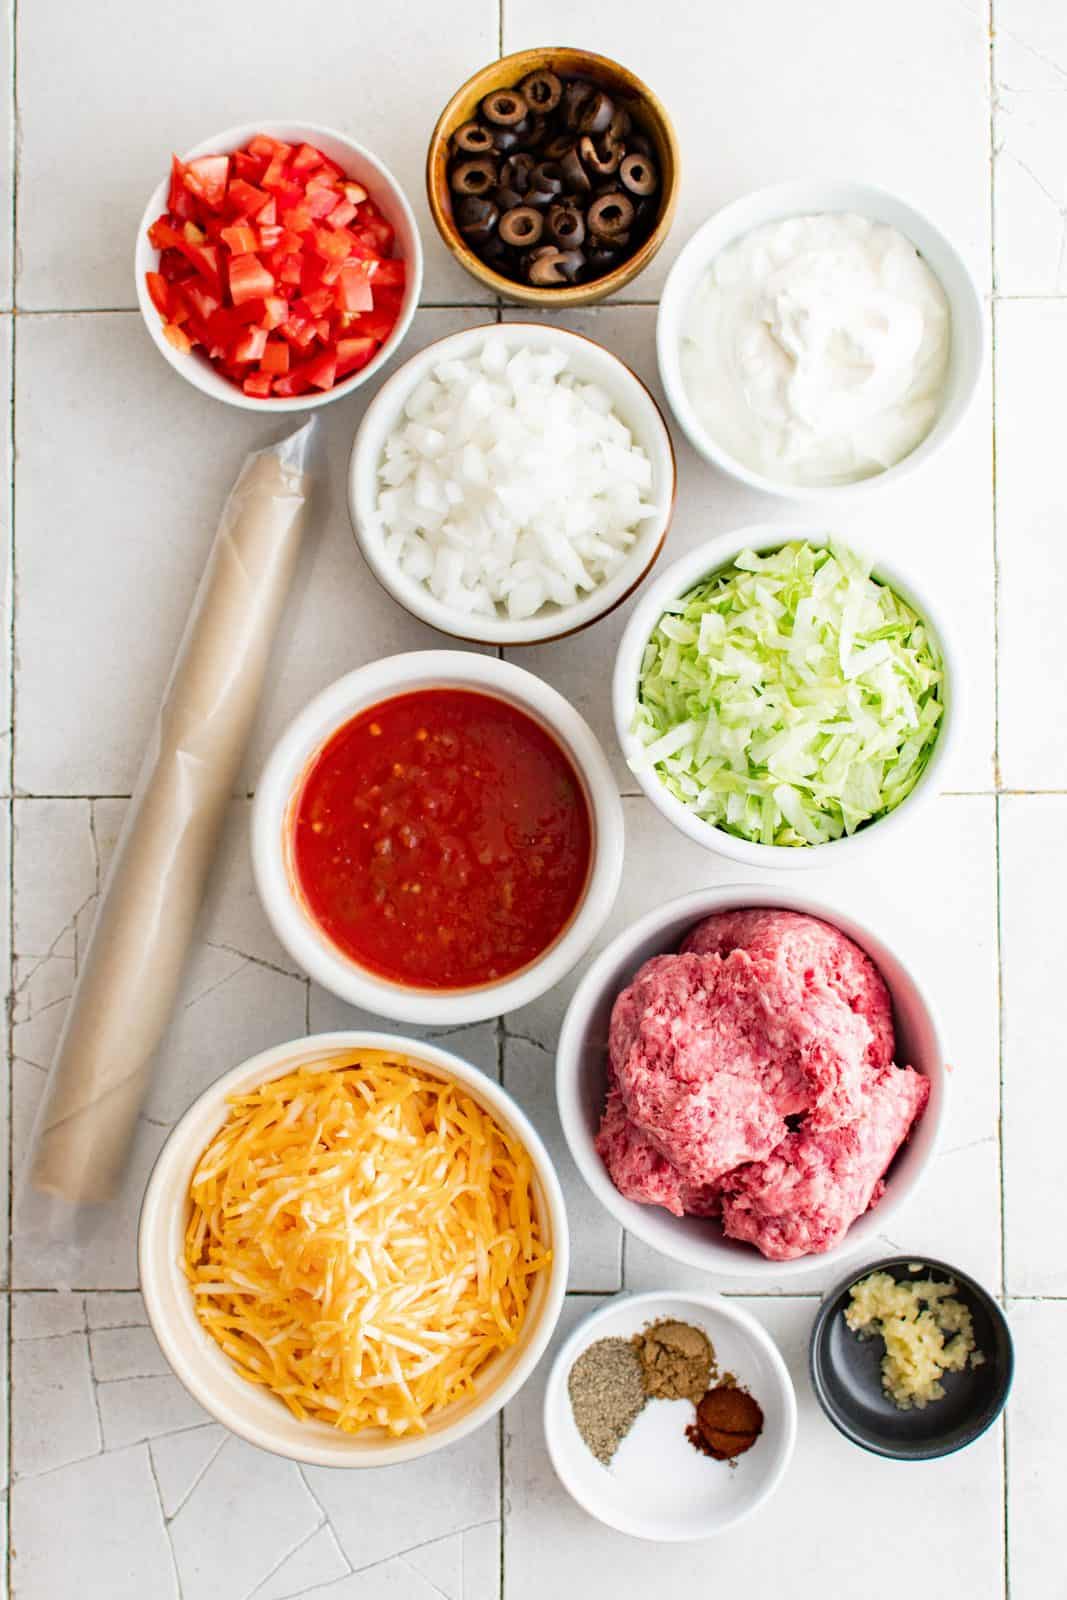 Ingredients needed: premade pie crust, ground beef, white onion, garlic, salt, black pepper, cumin, chili powder, Colby Jack cheese, salsa, sour cream, shredded iceberg lettuce, tomatoes and black olives.  